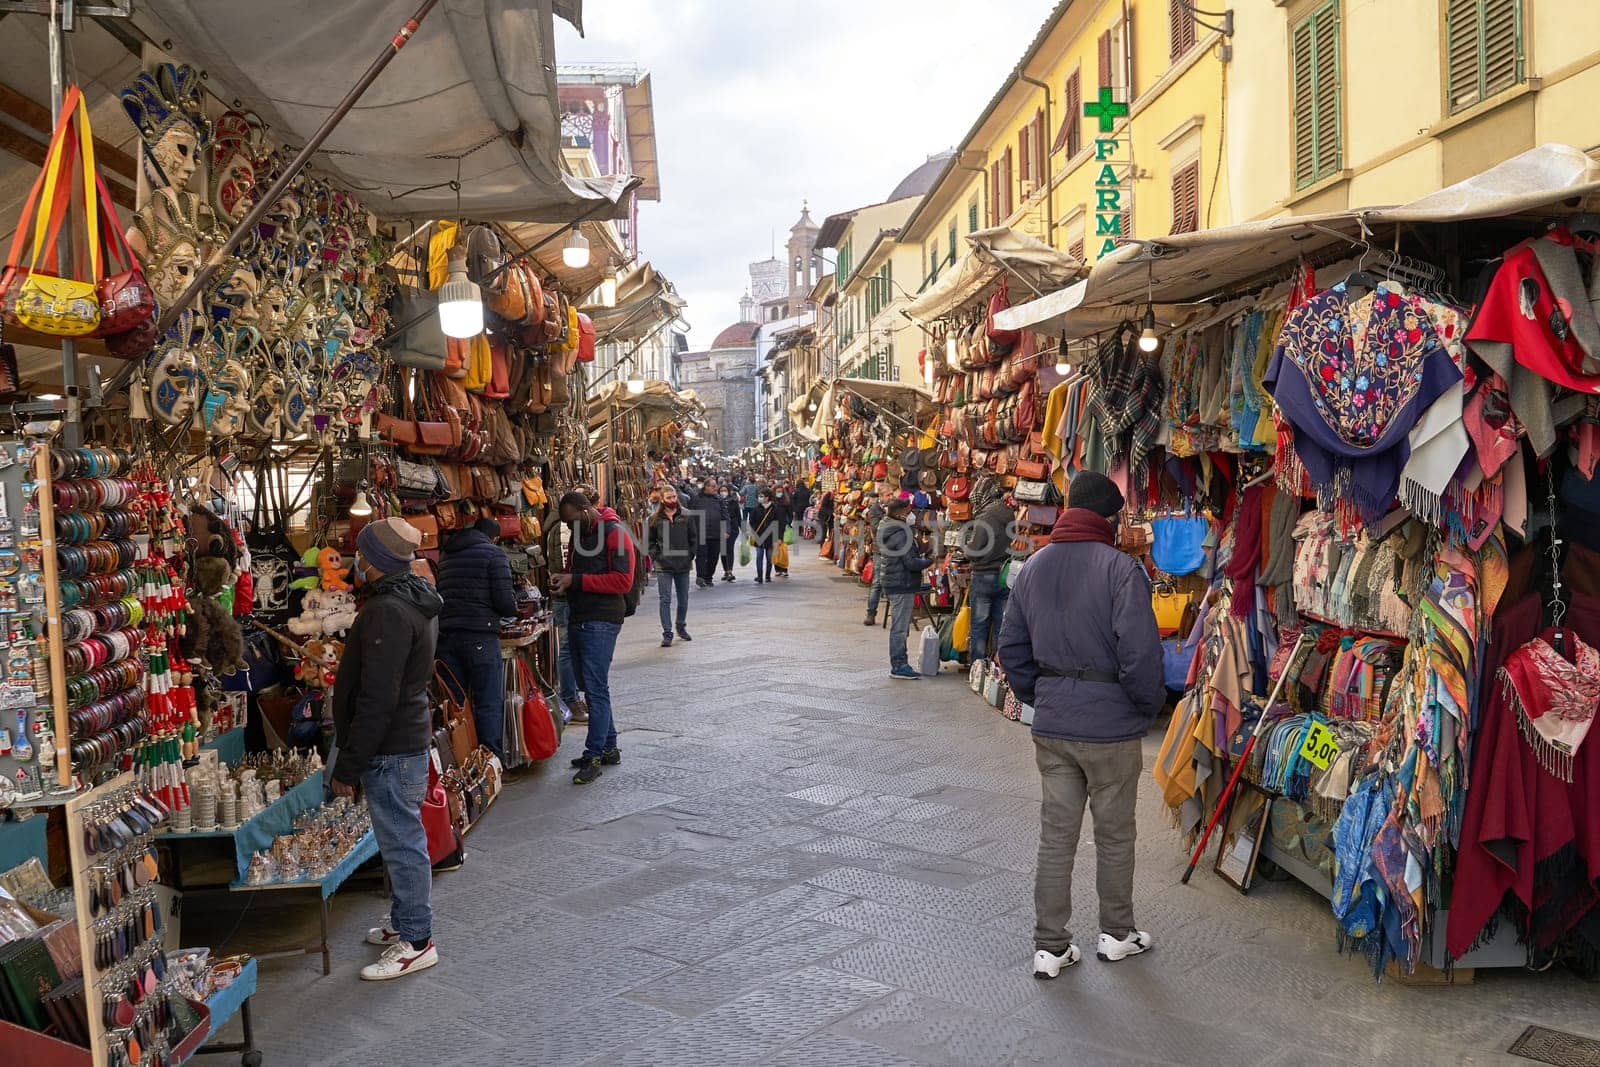 06 Dec, 2021 - Florence, Italy. San Lorenzo Street Market with many lether goods such as belts, bags, and wallets on display